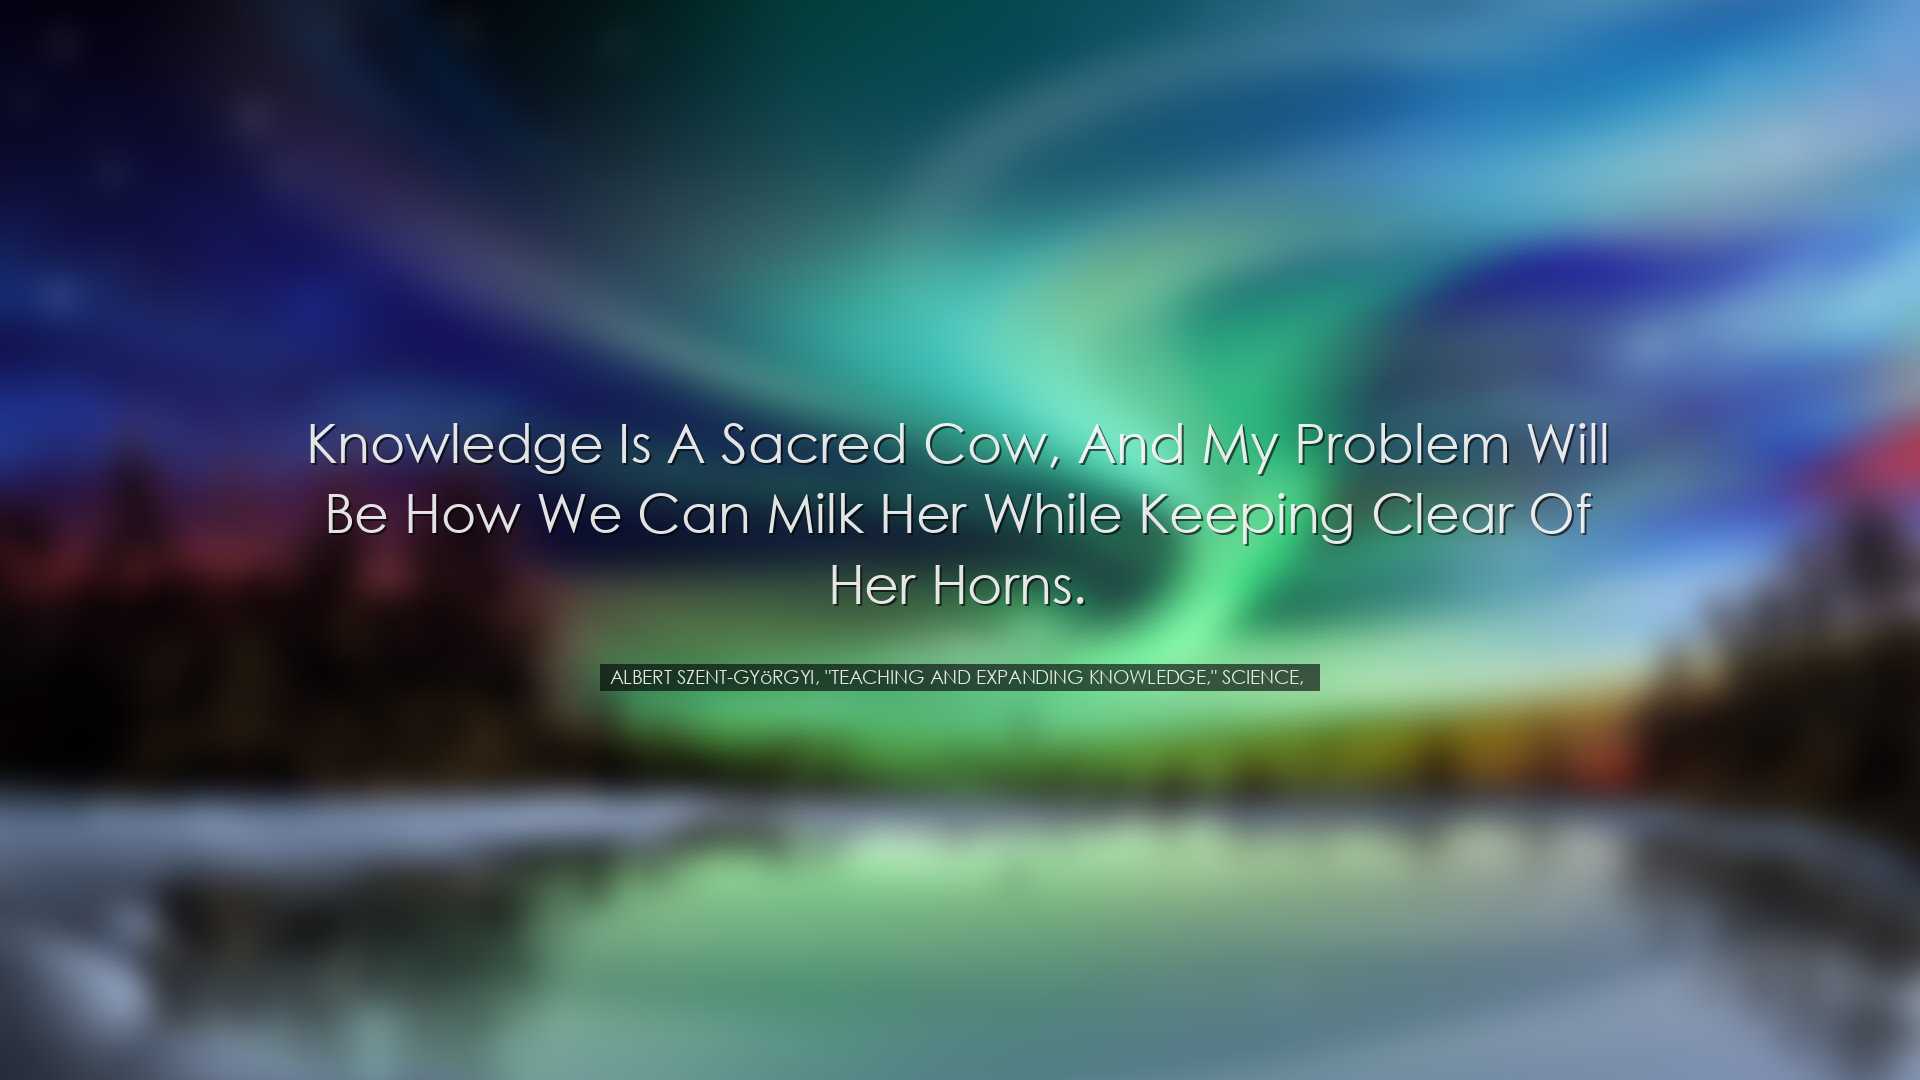 Knowledge is a sacred cow, and my problem will be how we can milk